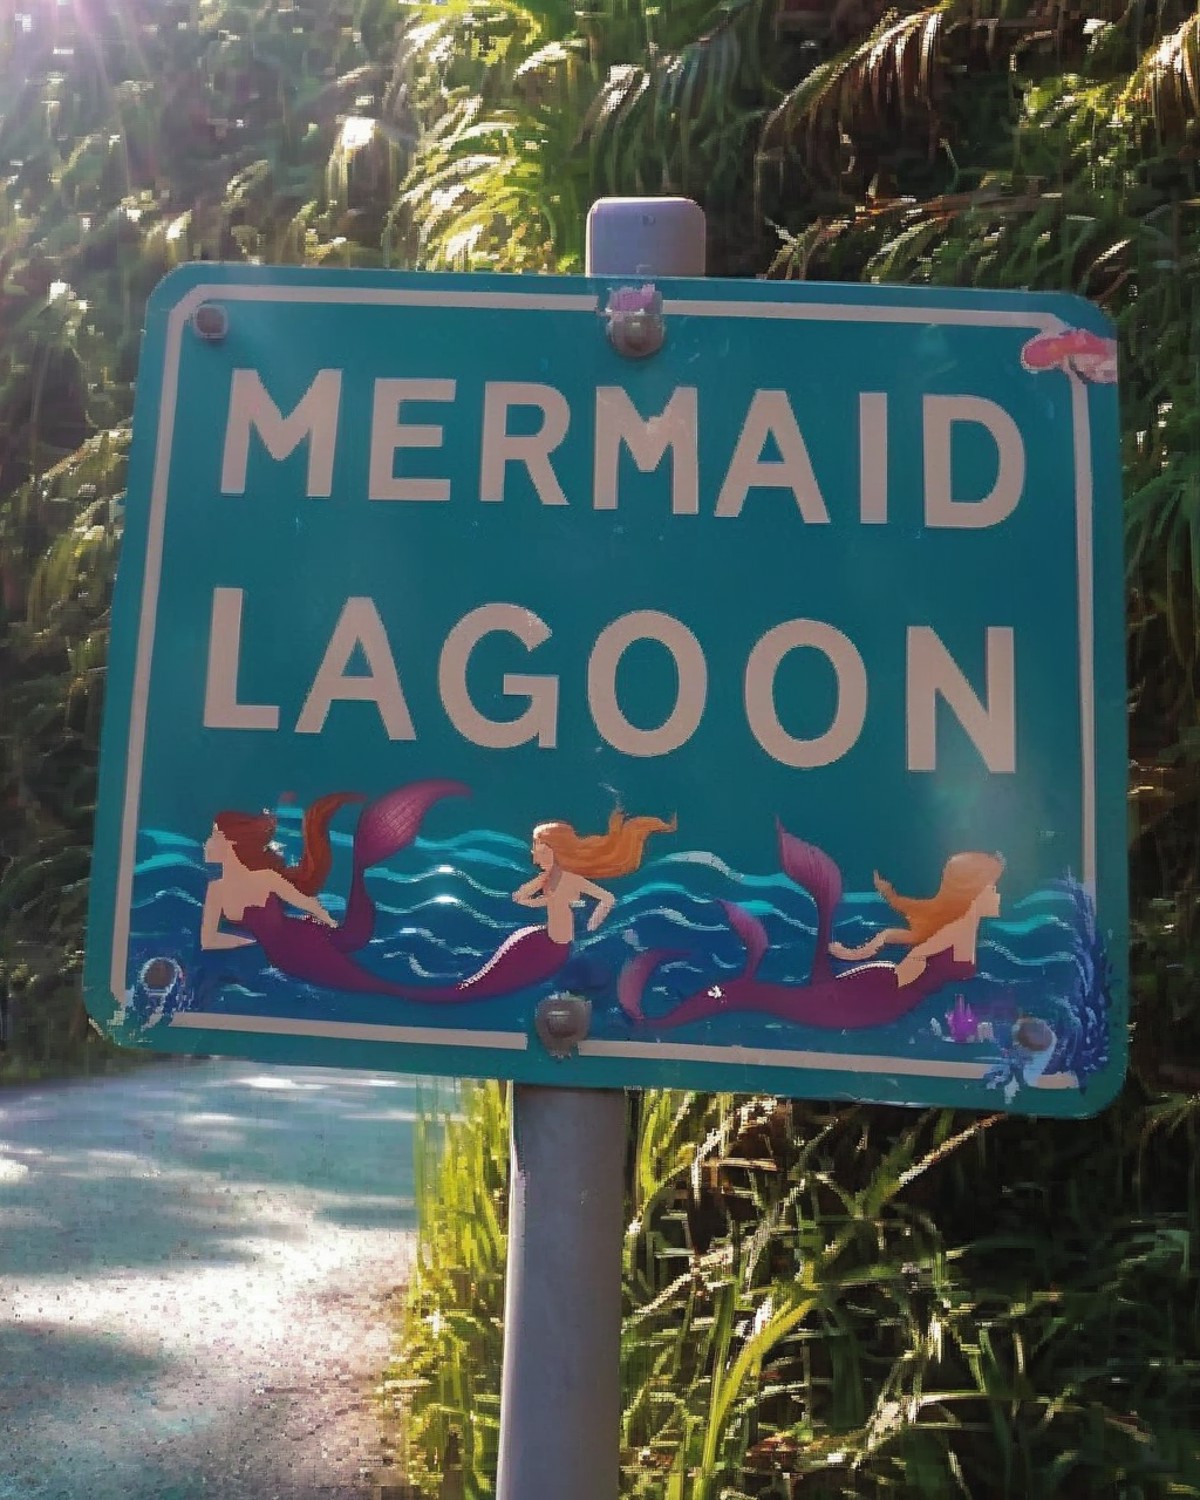 a photo of a road sign , Mermaid Lagoon:1.2, a fantastical sign pointing the way to a "Mermaid Lagoon," complete with merm...